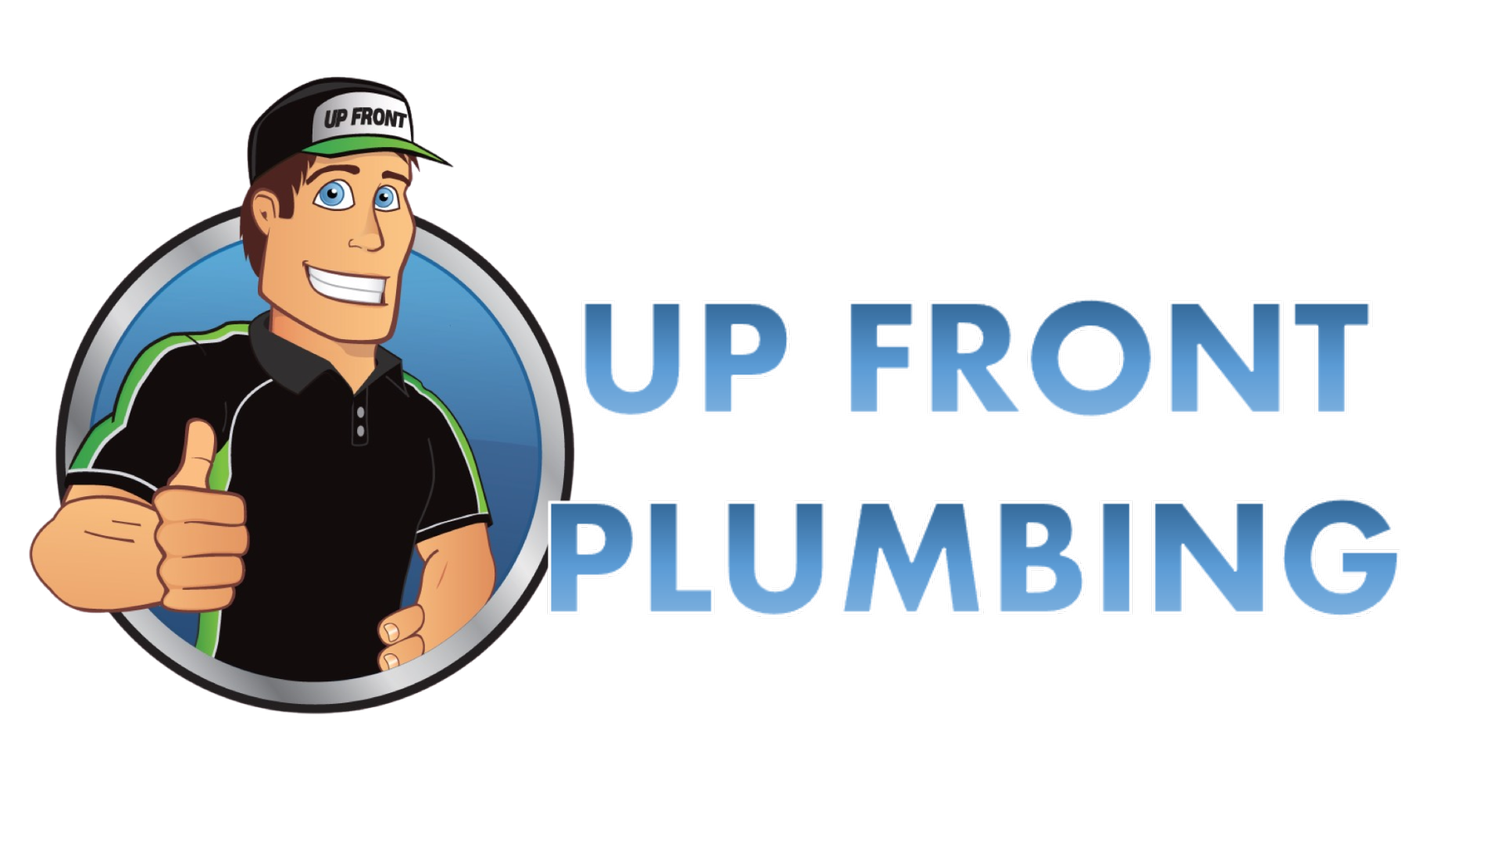 UP FRONT PLUMBING SERVICES